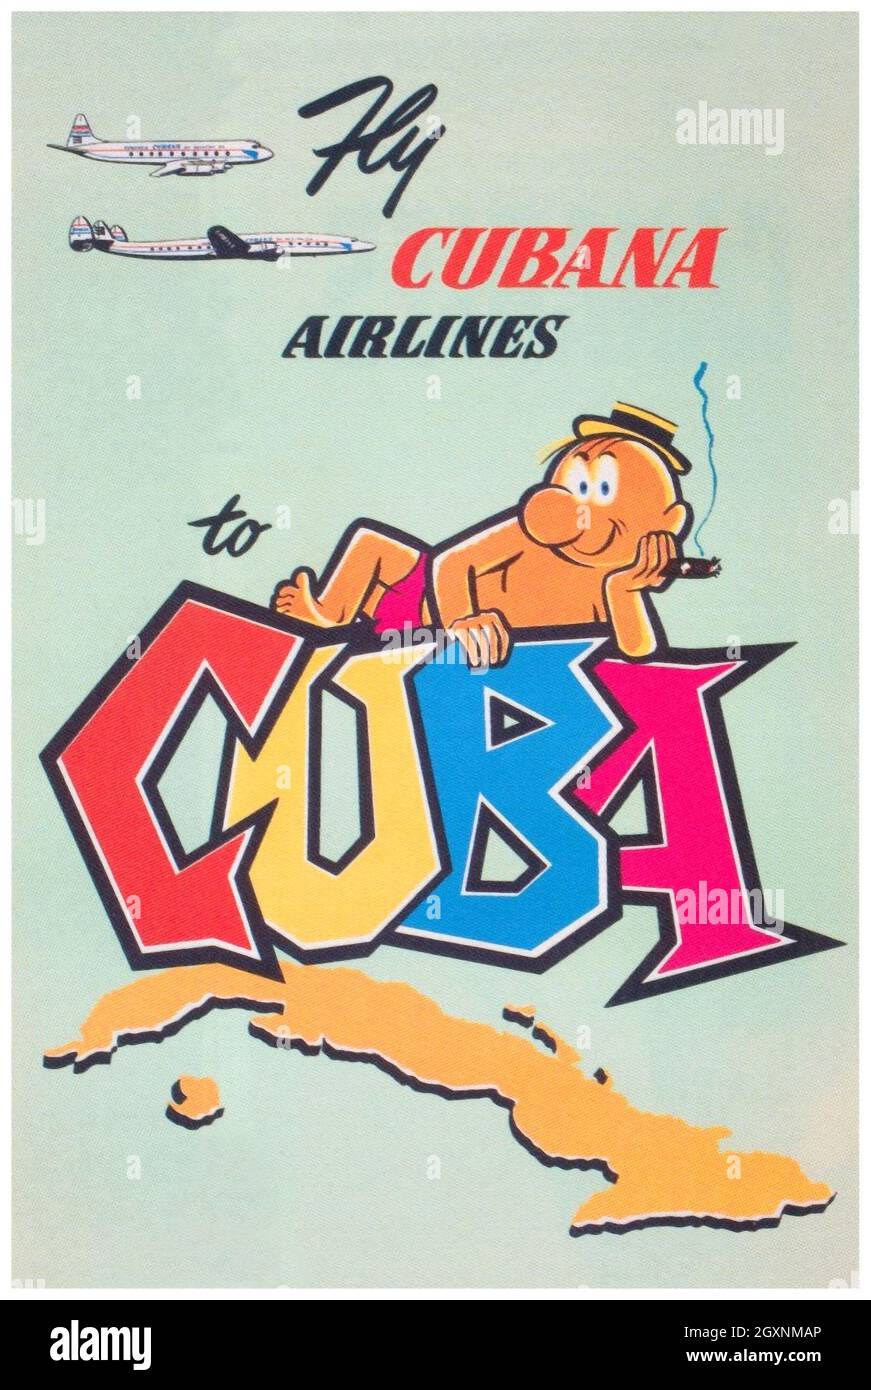 Fly Cubana Airlines to Cuba Stock Photo